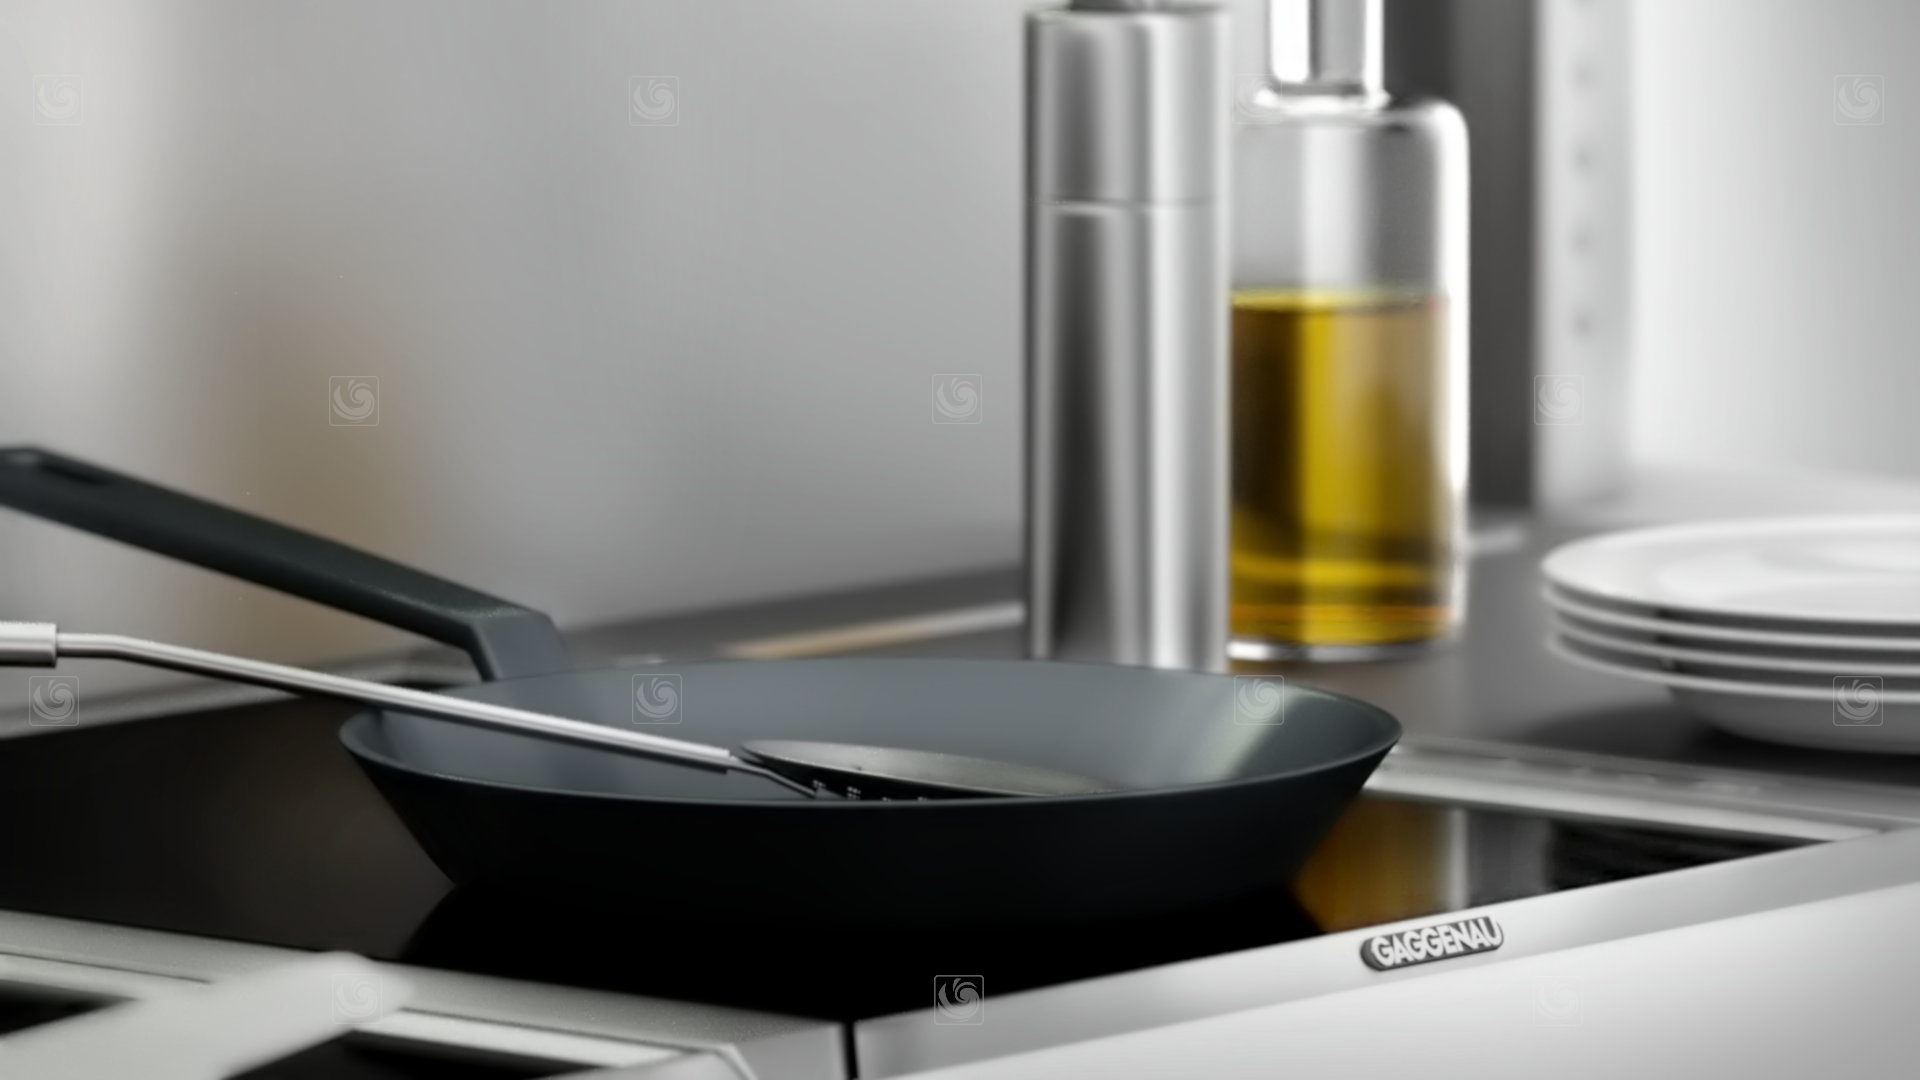 Photorealistic rendering of 3D models of Gaggenau kitchen items